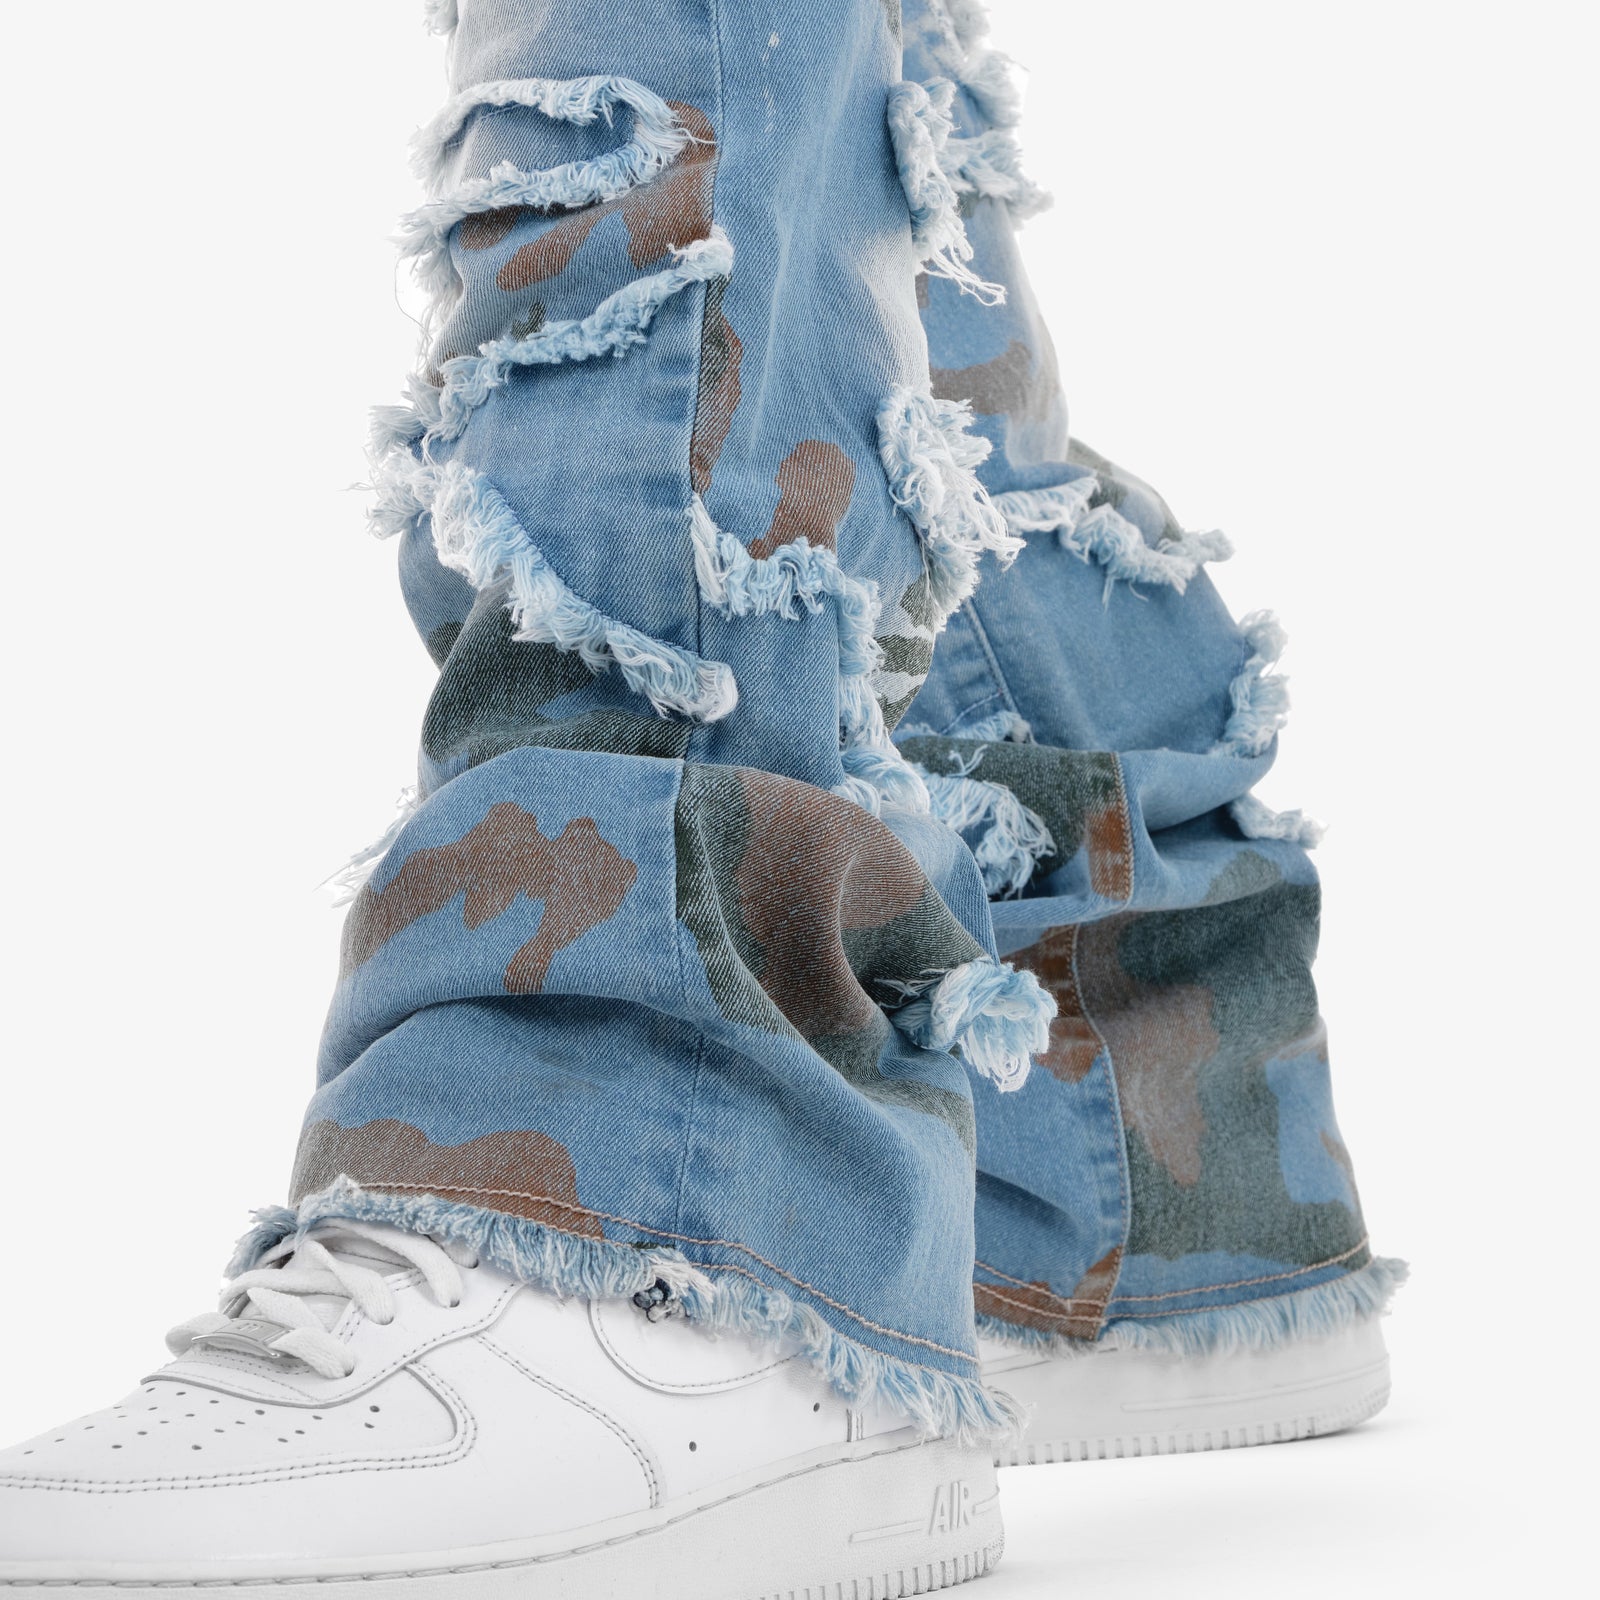 LIGHT SAND BLUE STACKED CAMO JEANS